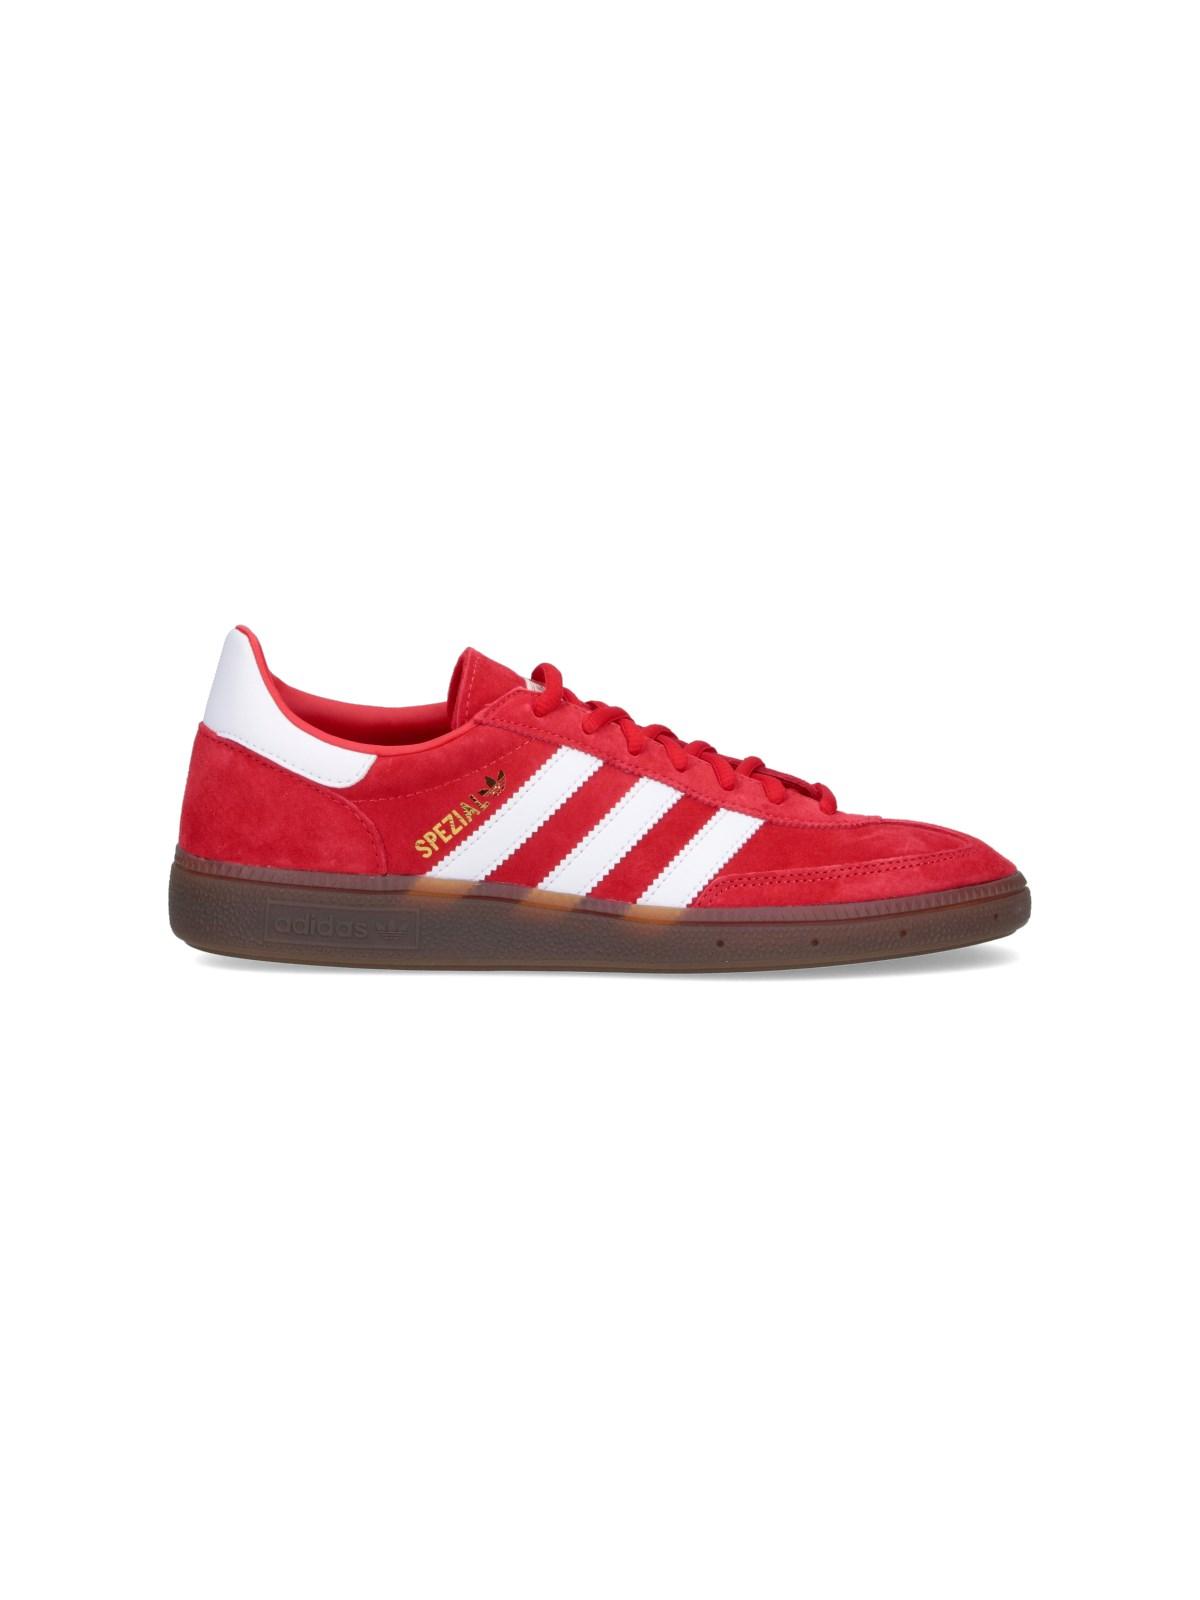 adidas "handball Spezial" Sneakers in Red for Men | Lyst